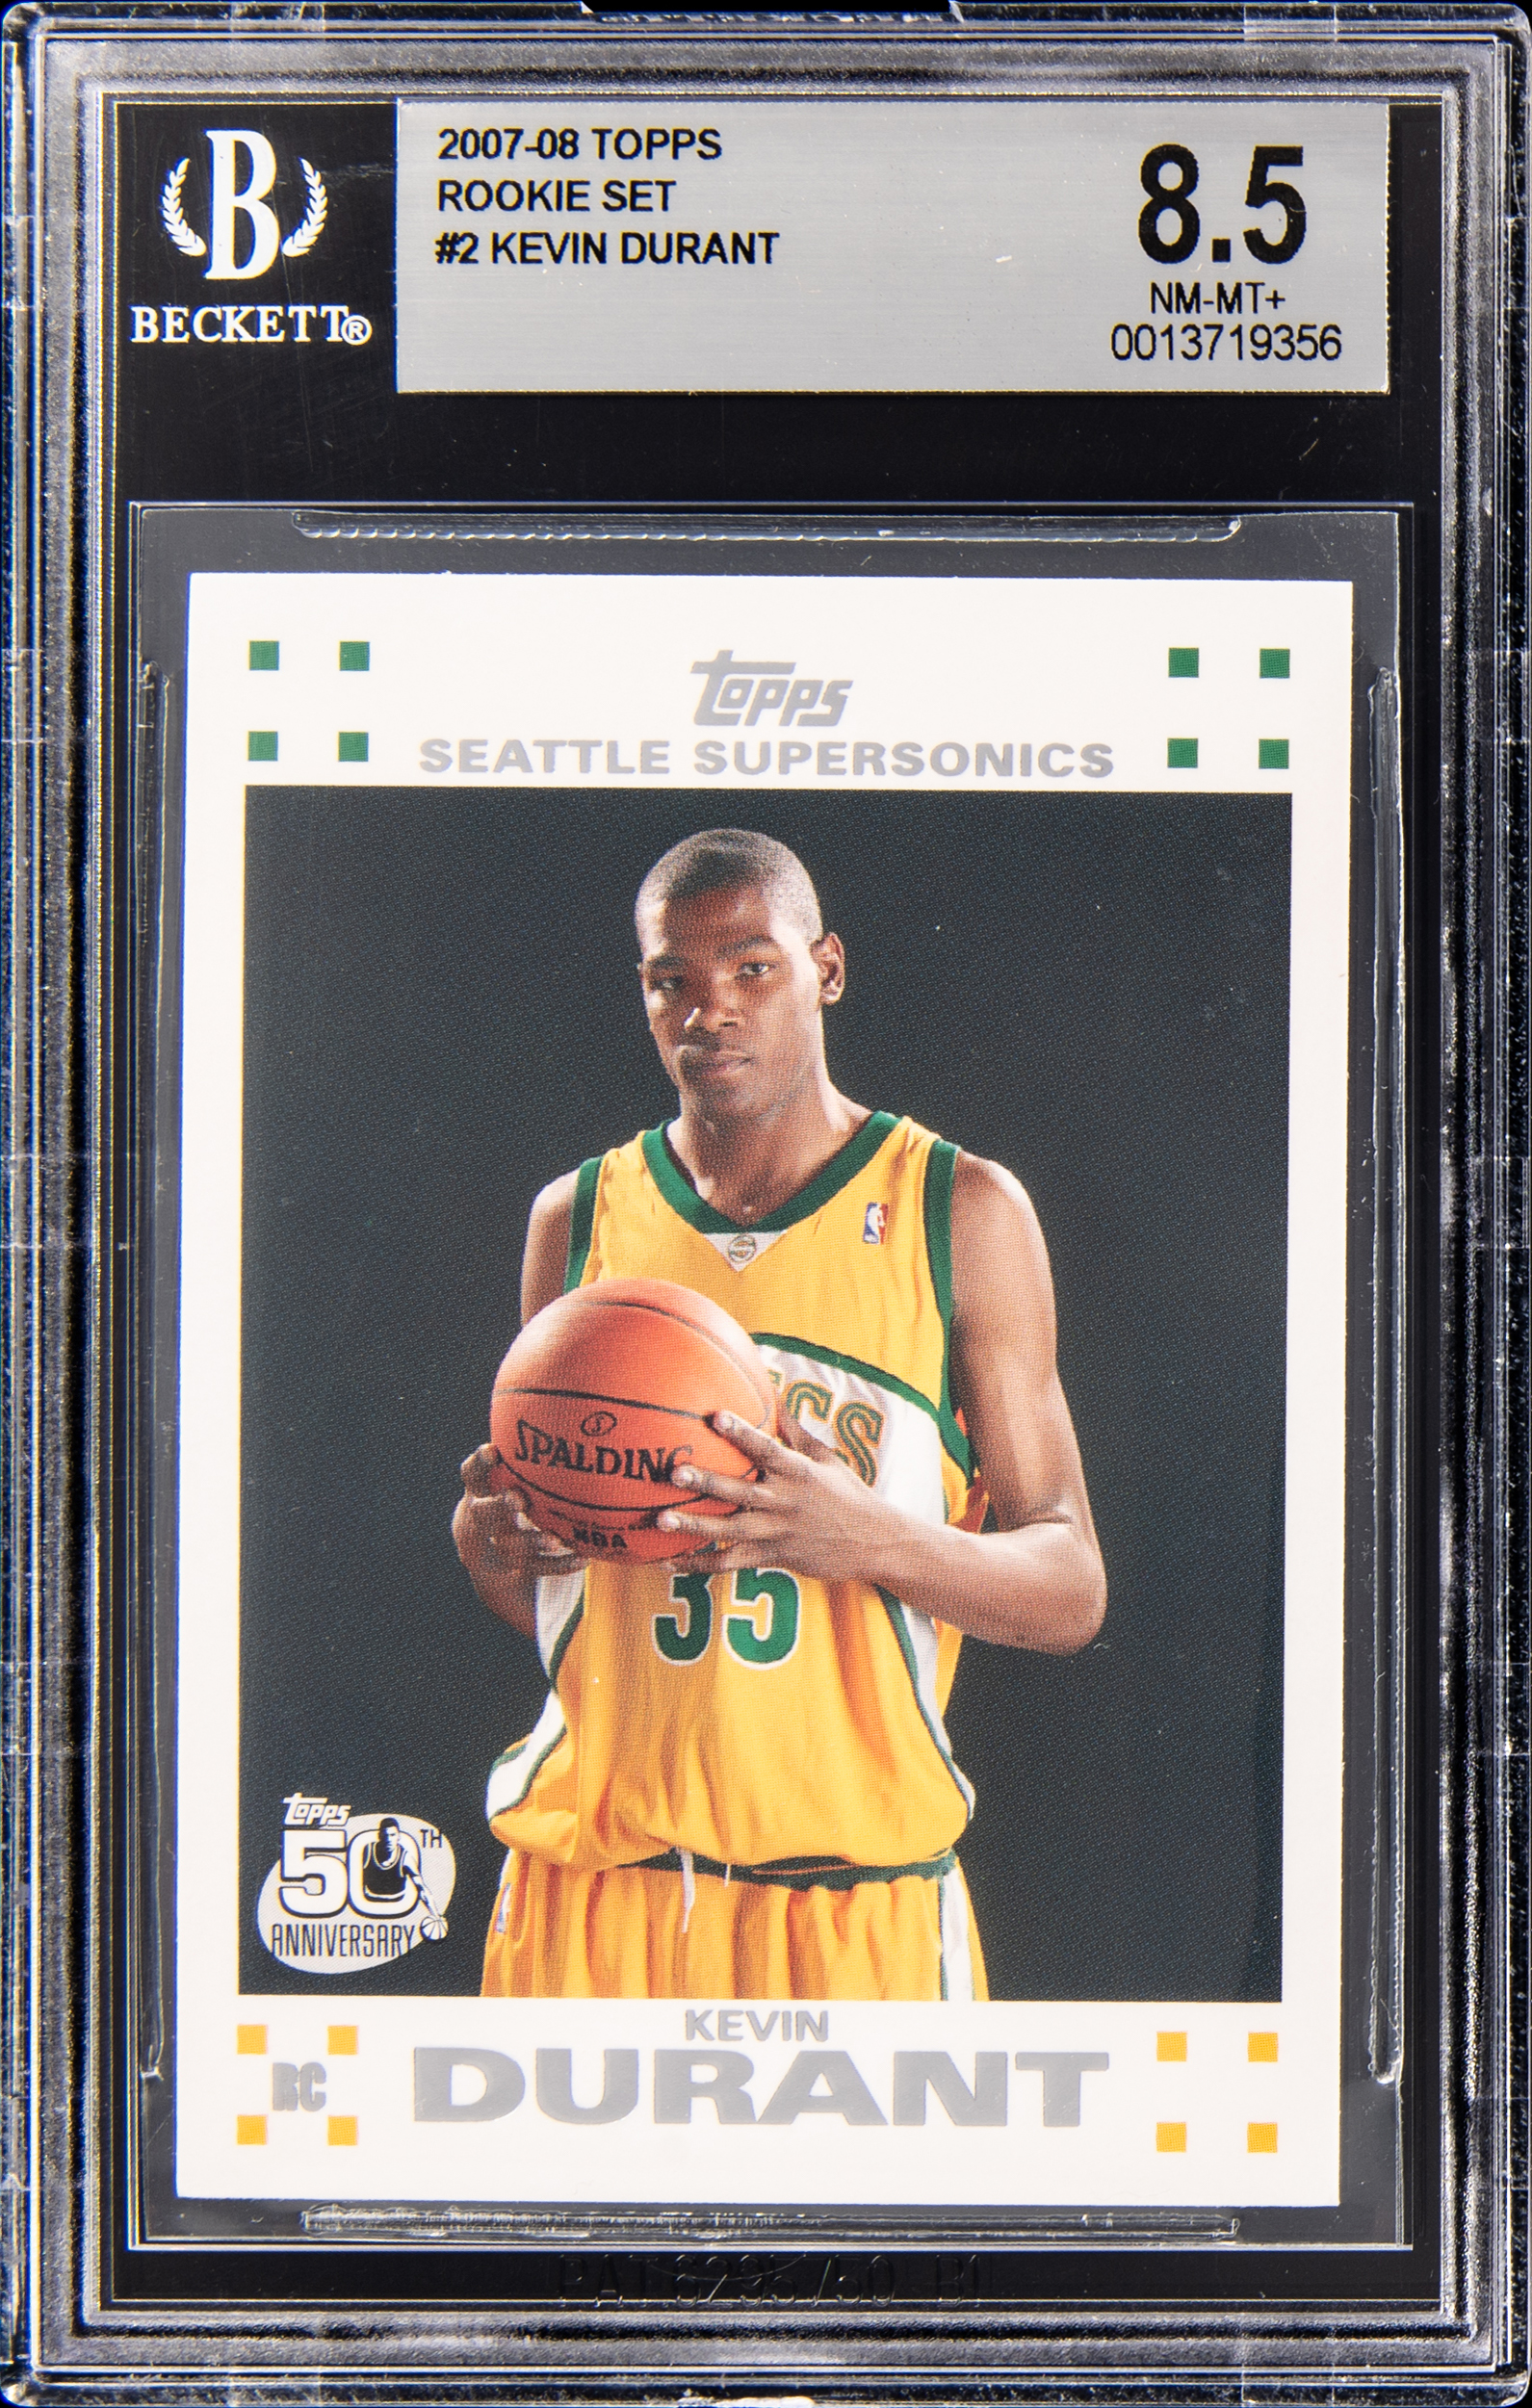 2007-08 Topps Rookie Card #2 Kevin Durant Rookie Card – BGS NM-MT+ 8.5